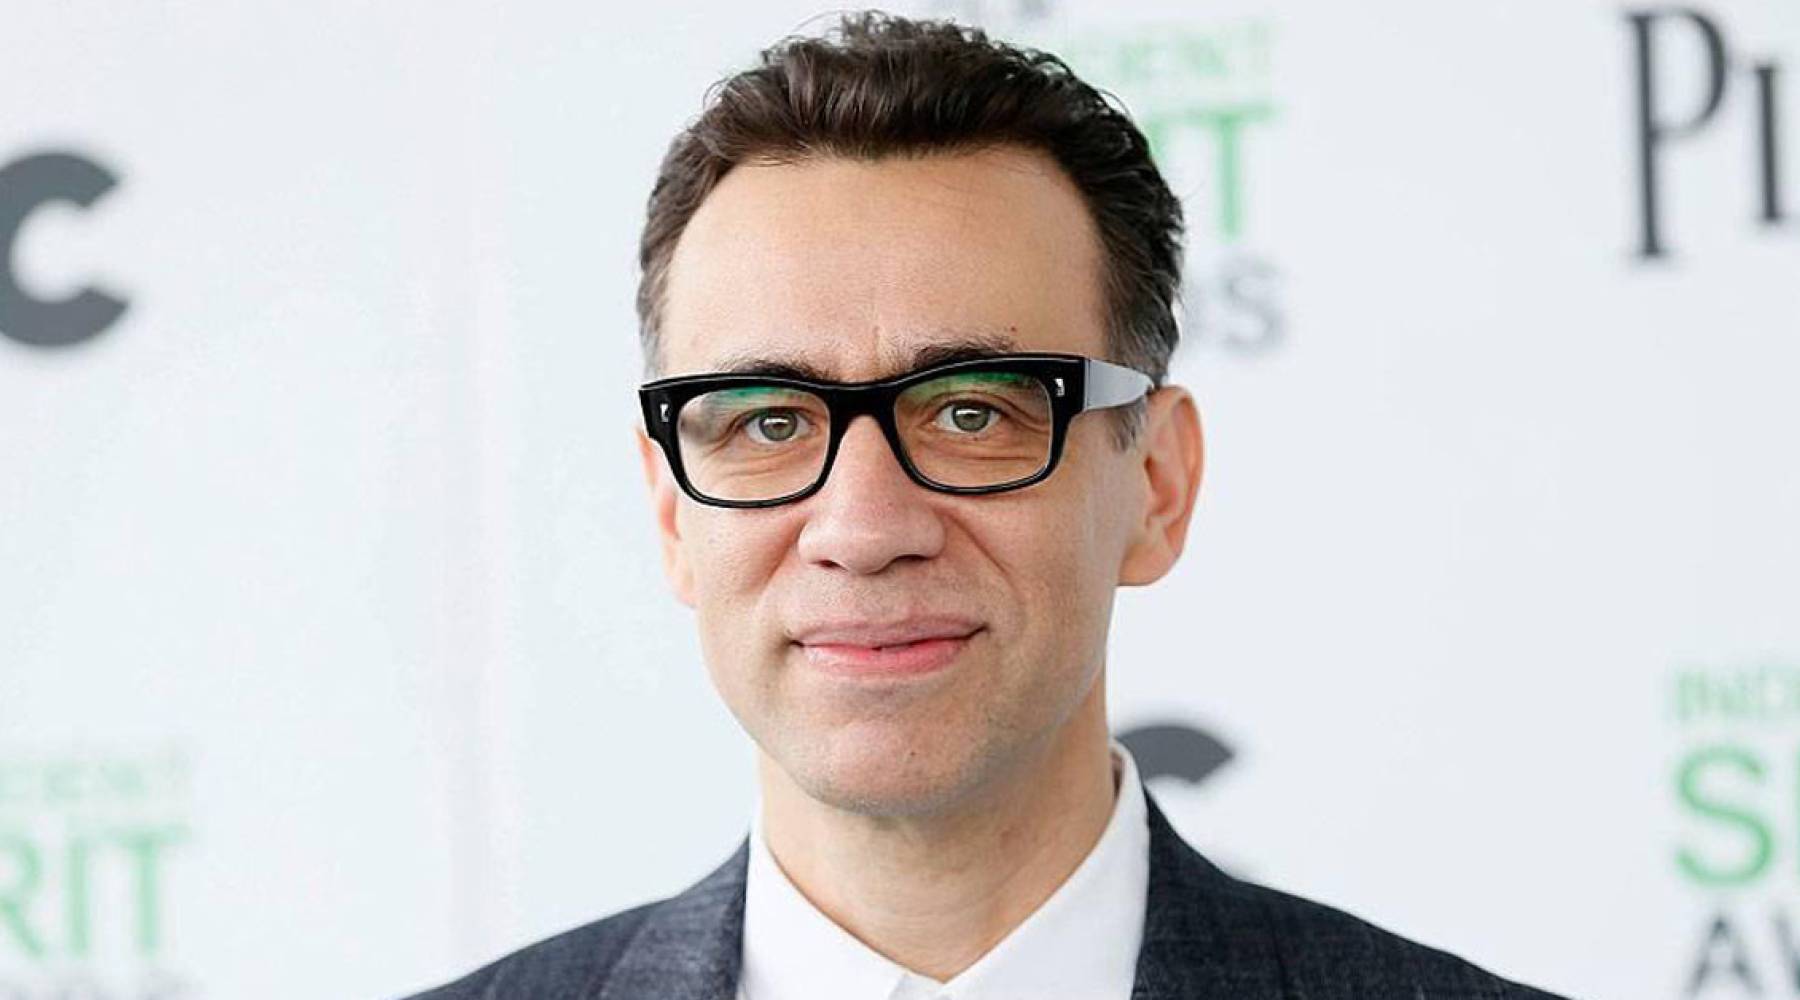 Archived Fred Armisen Comedy For Musicians But Everyone Is